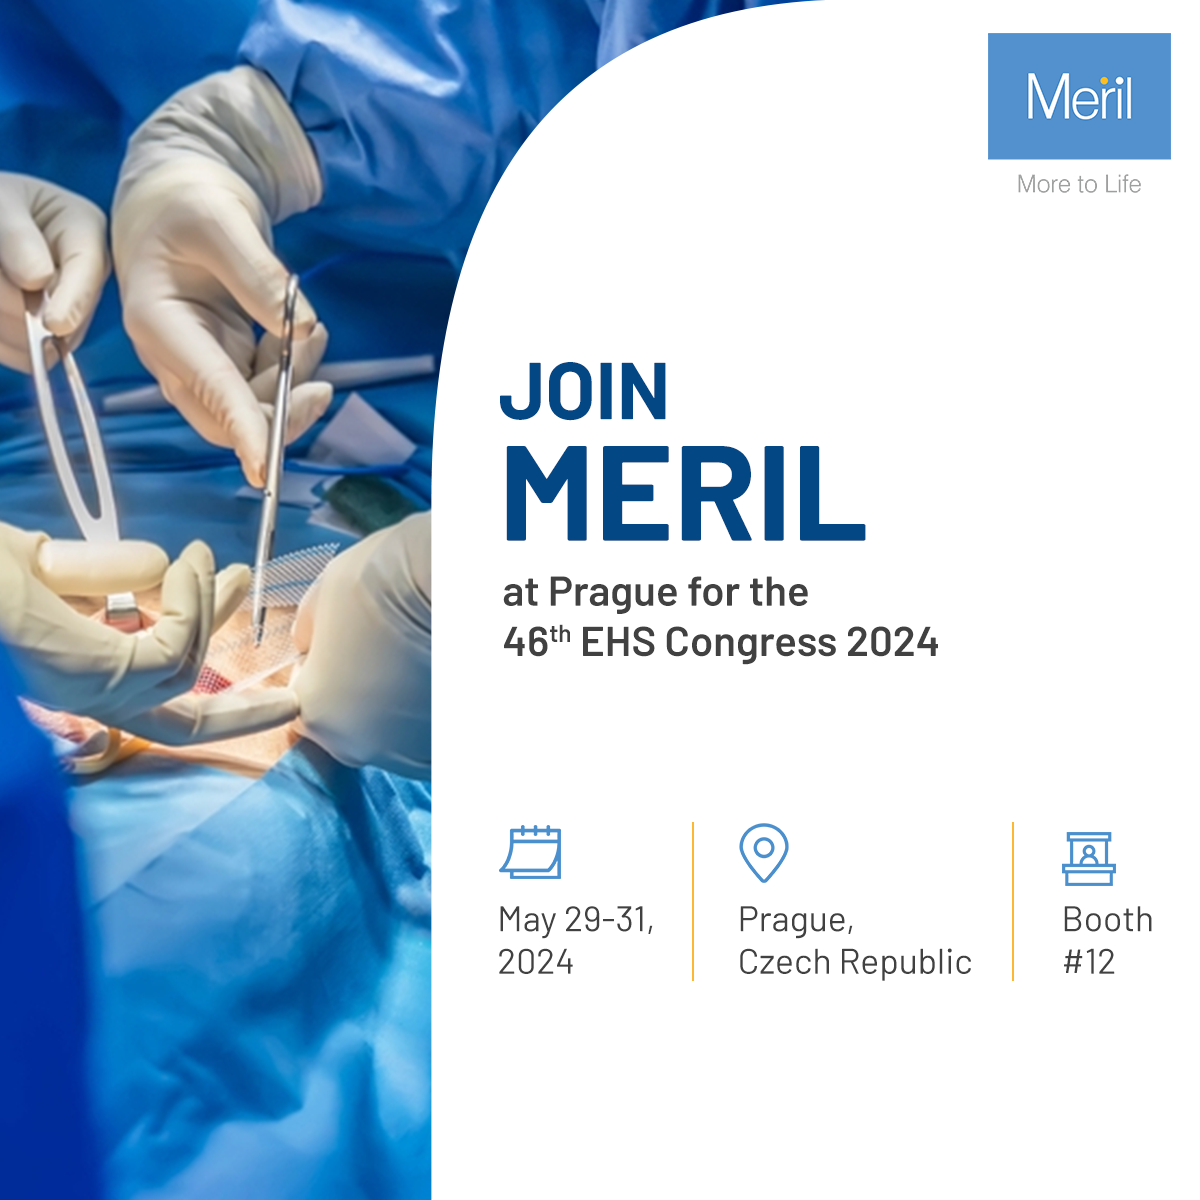 Join Meril at the 46th European Hernia Society Annual Conference 2024!